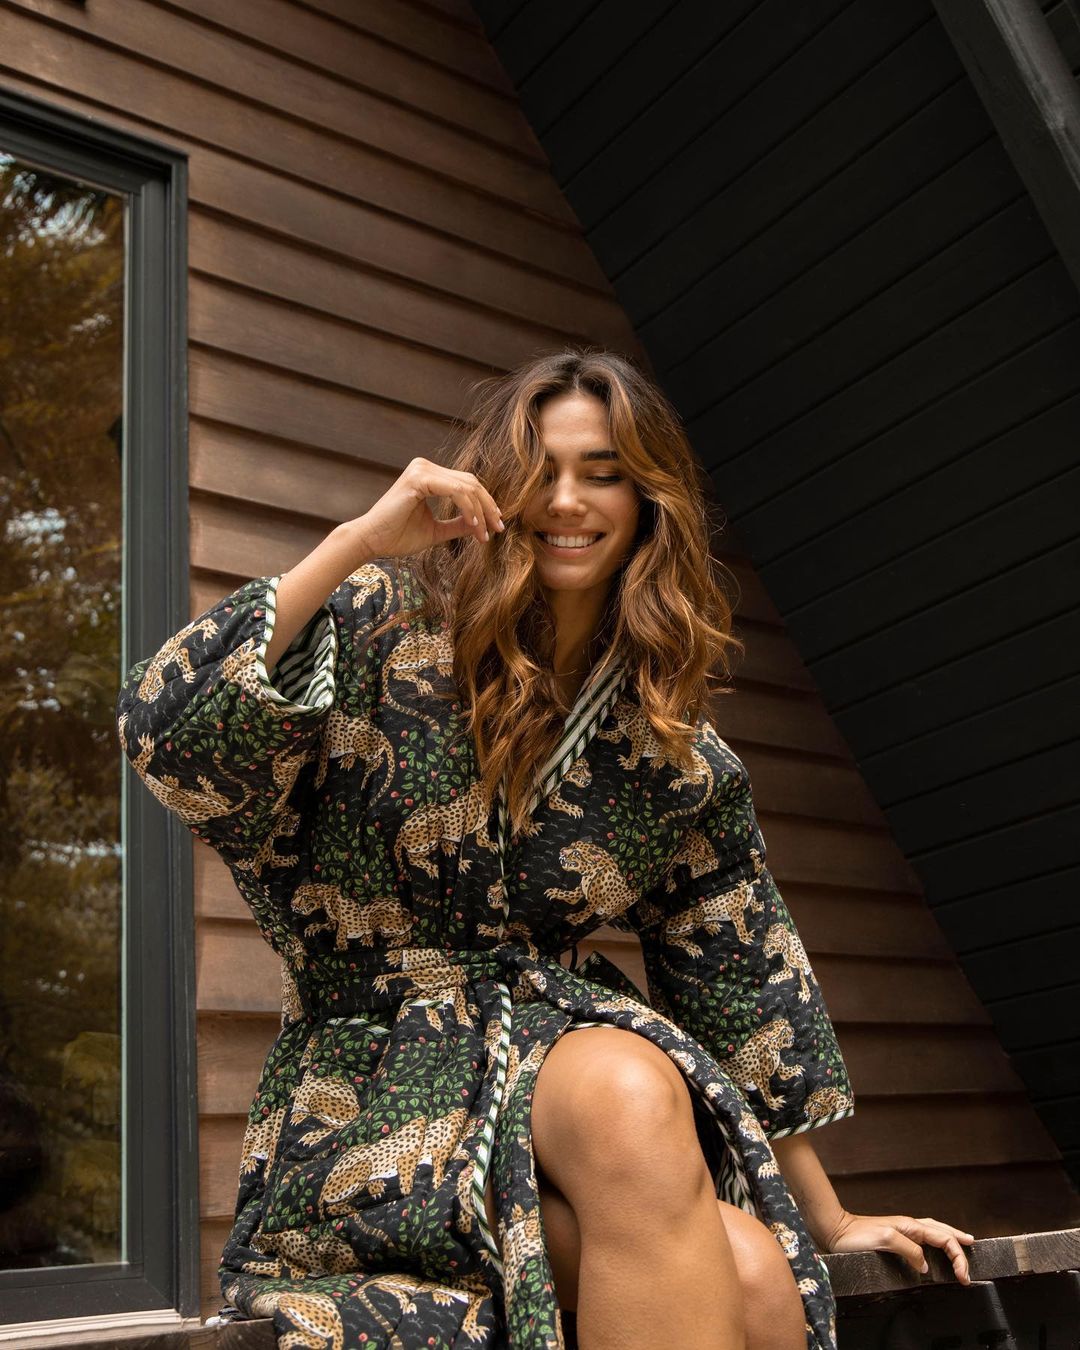 Rachell Vallori wears Printfresh Floral Outfits during Photoshoot, Oct 2022 9